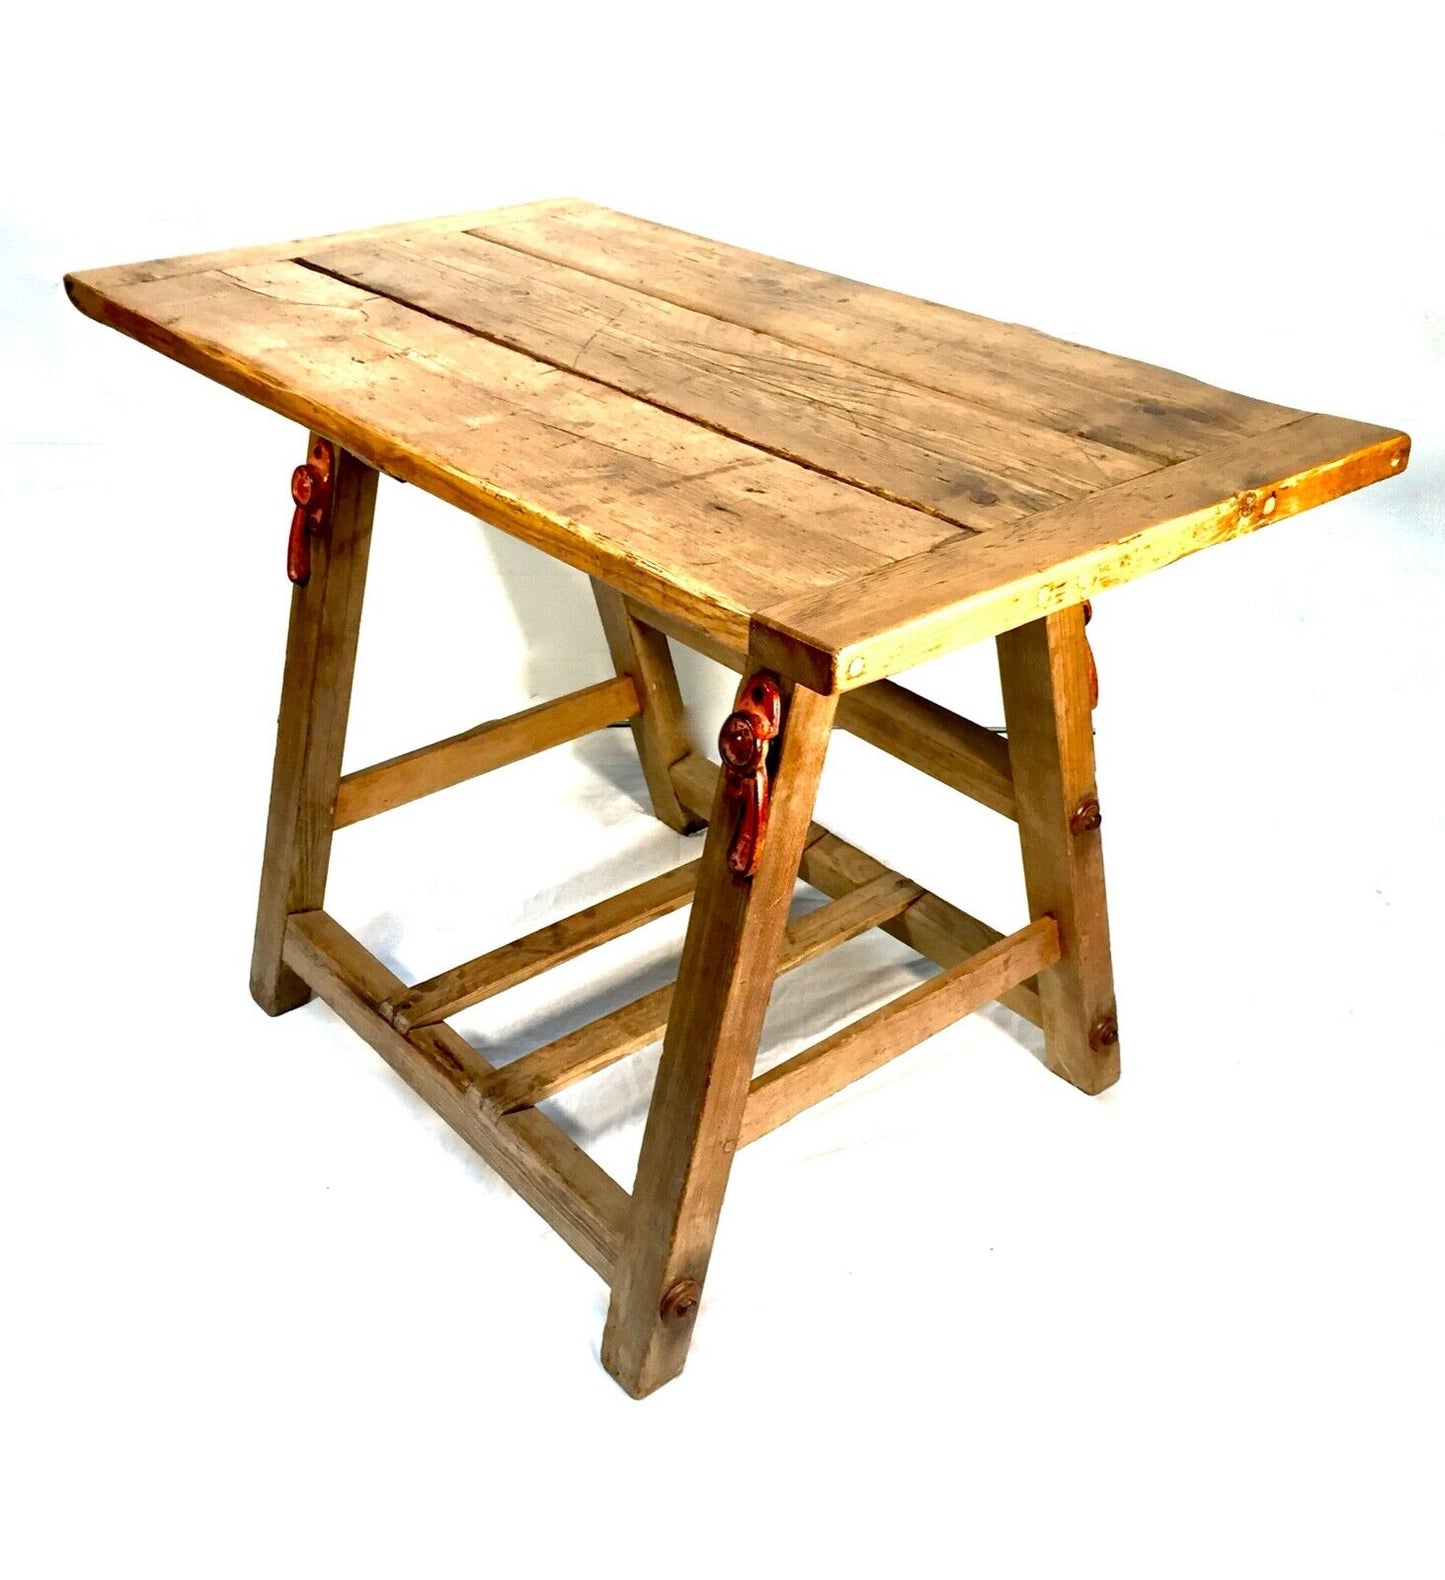 Antique Pine Wooden Workbench / Rustic Kitchen Dining Table Early 20th Century